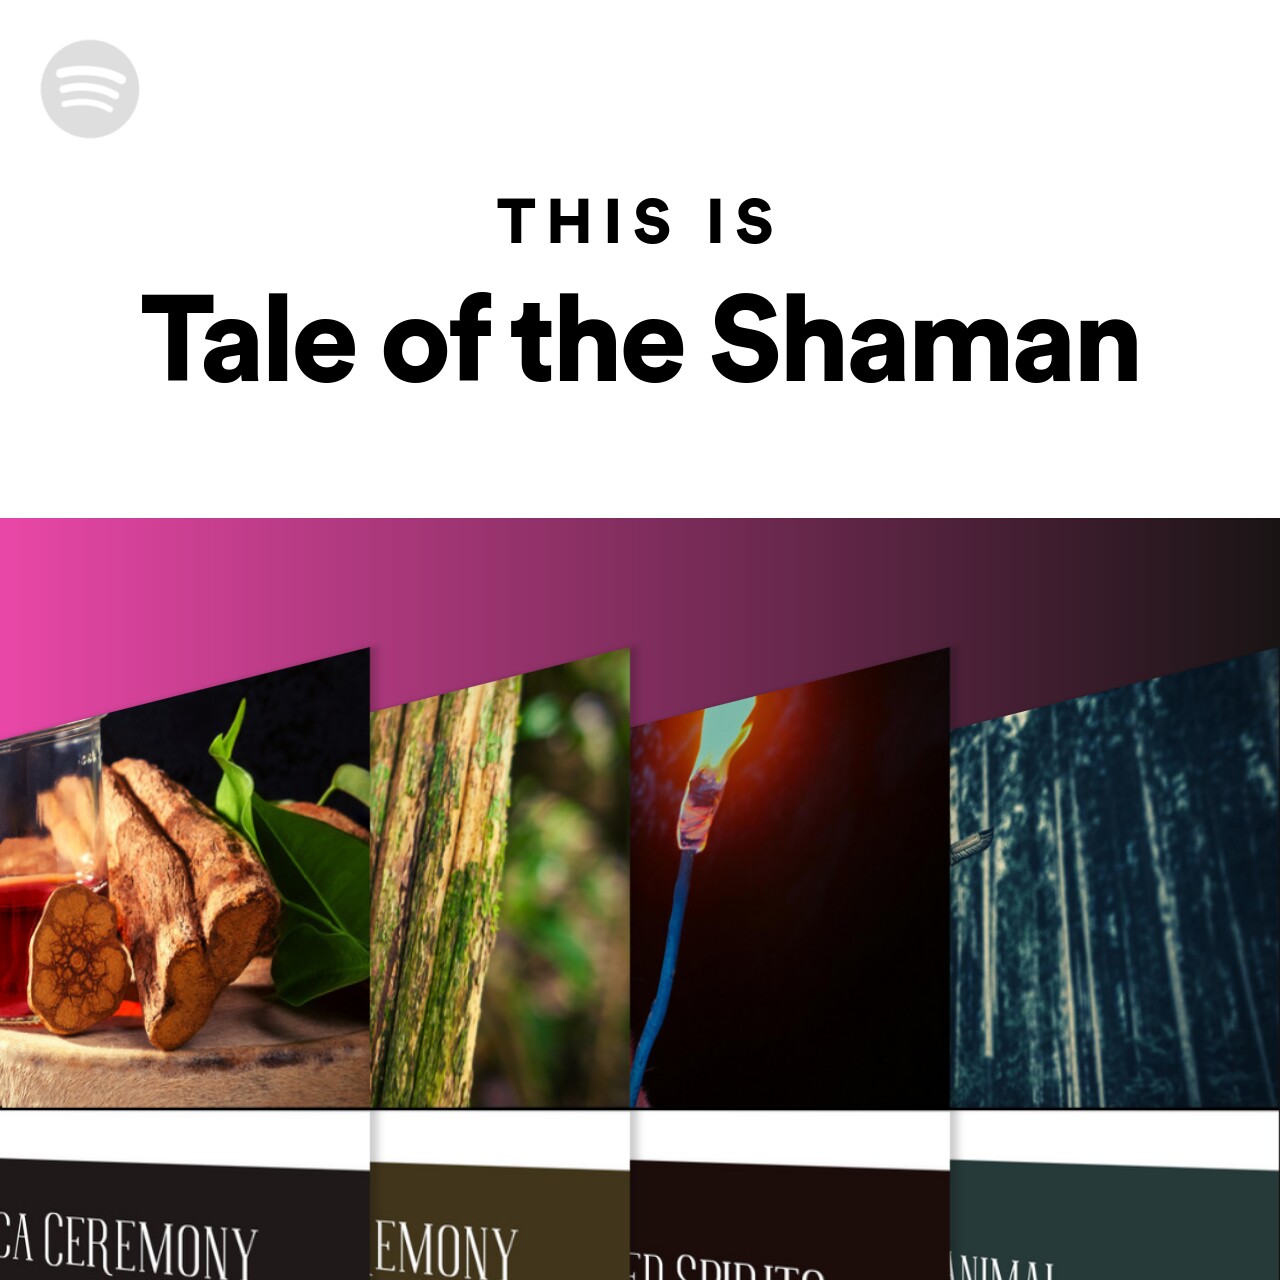 This Is Tale of the Shaman